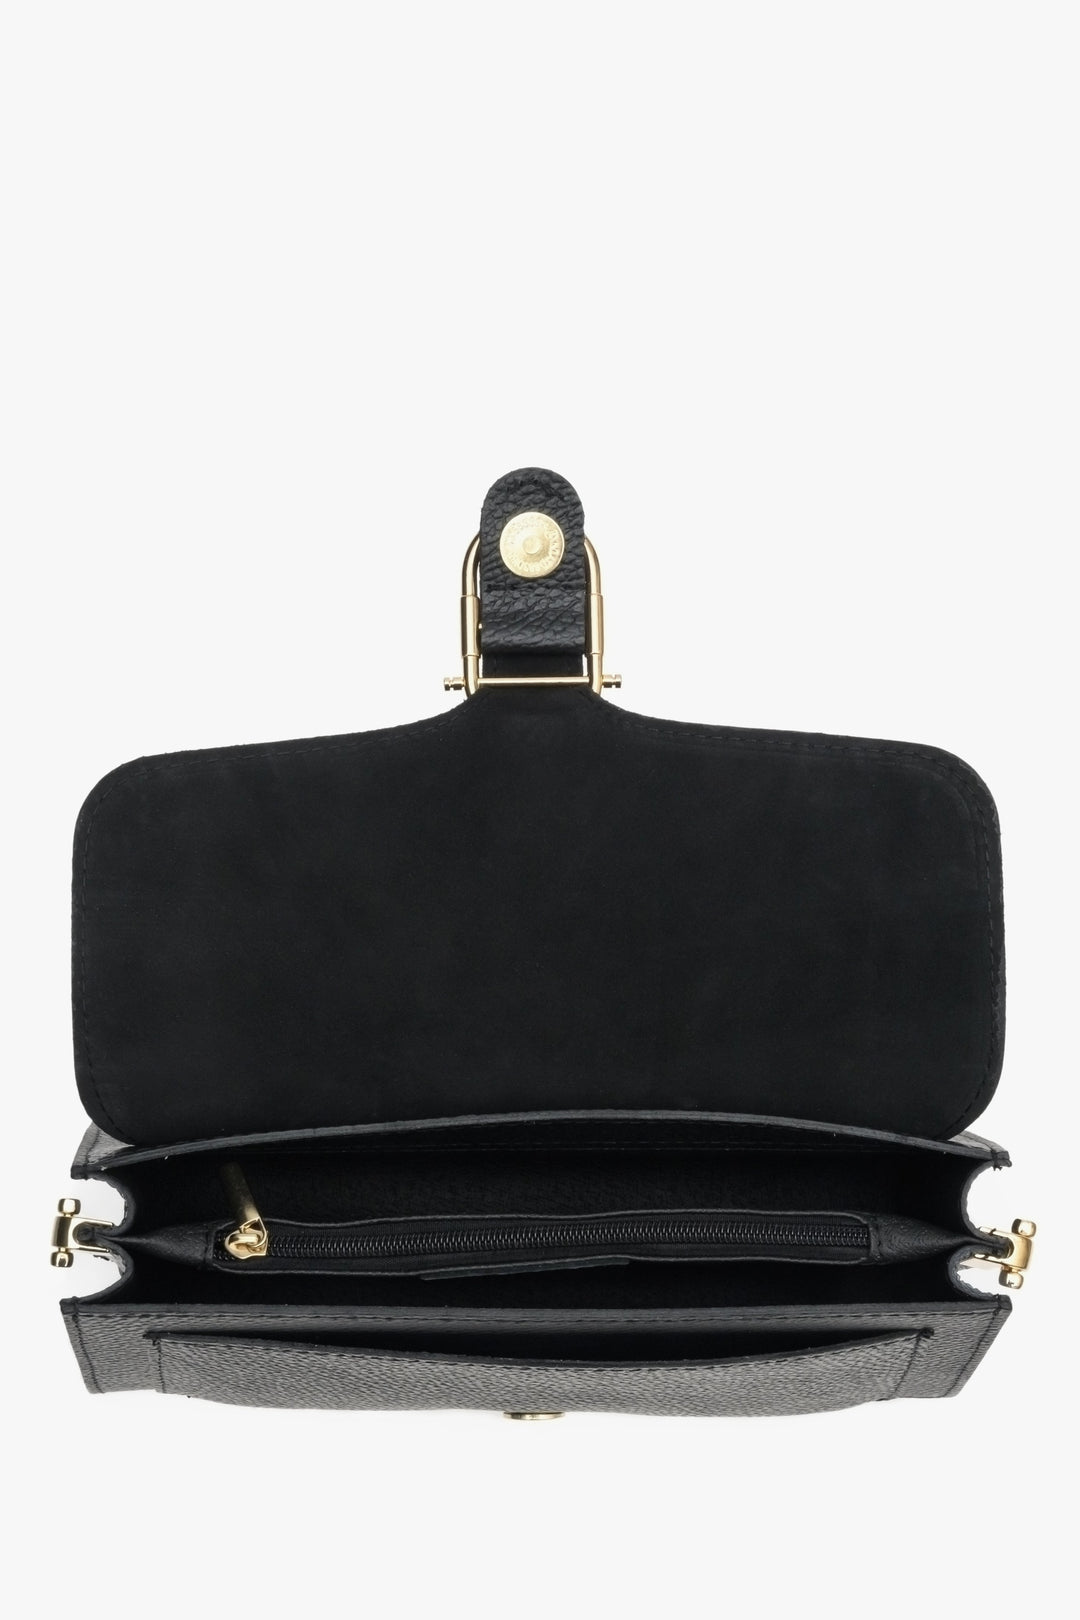 Women's small leather handbag in black color - presentation of the lining of the bag.